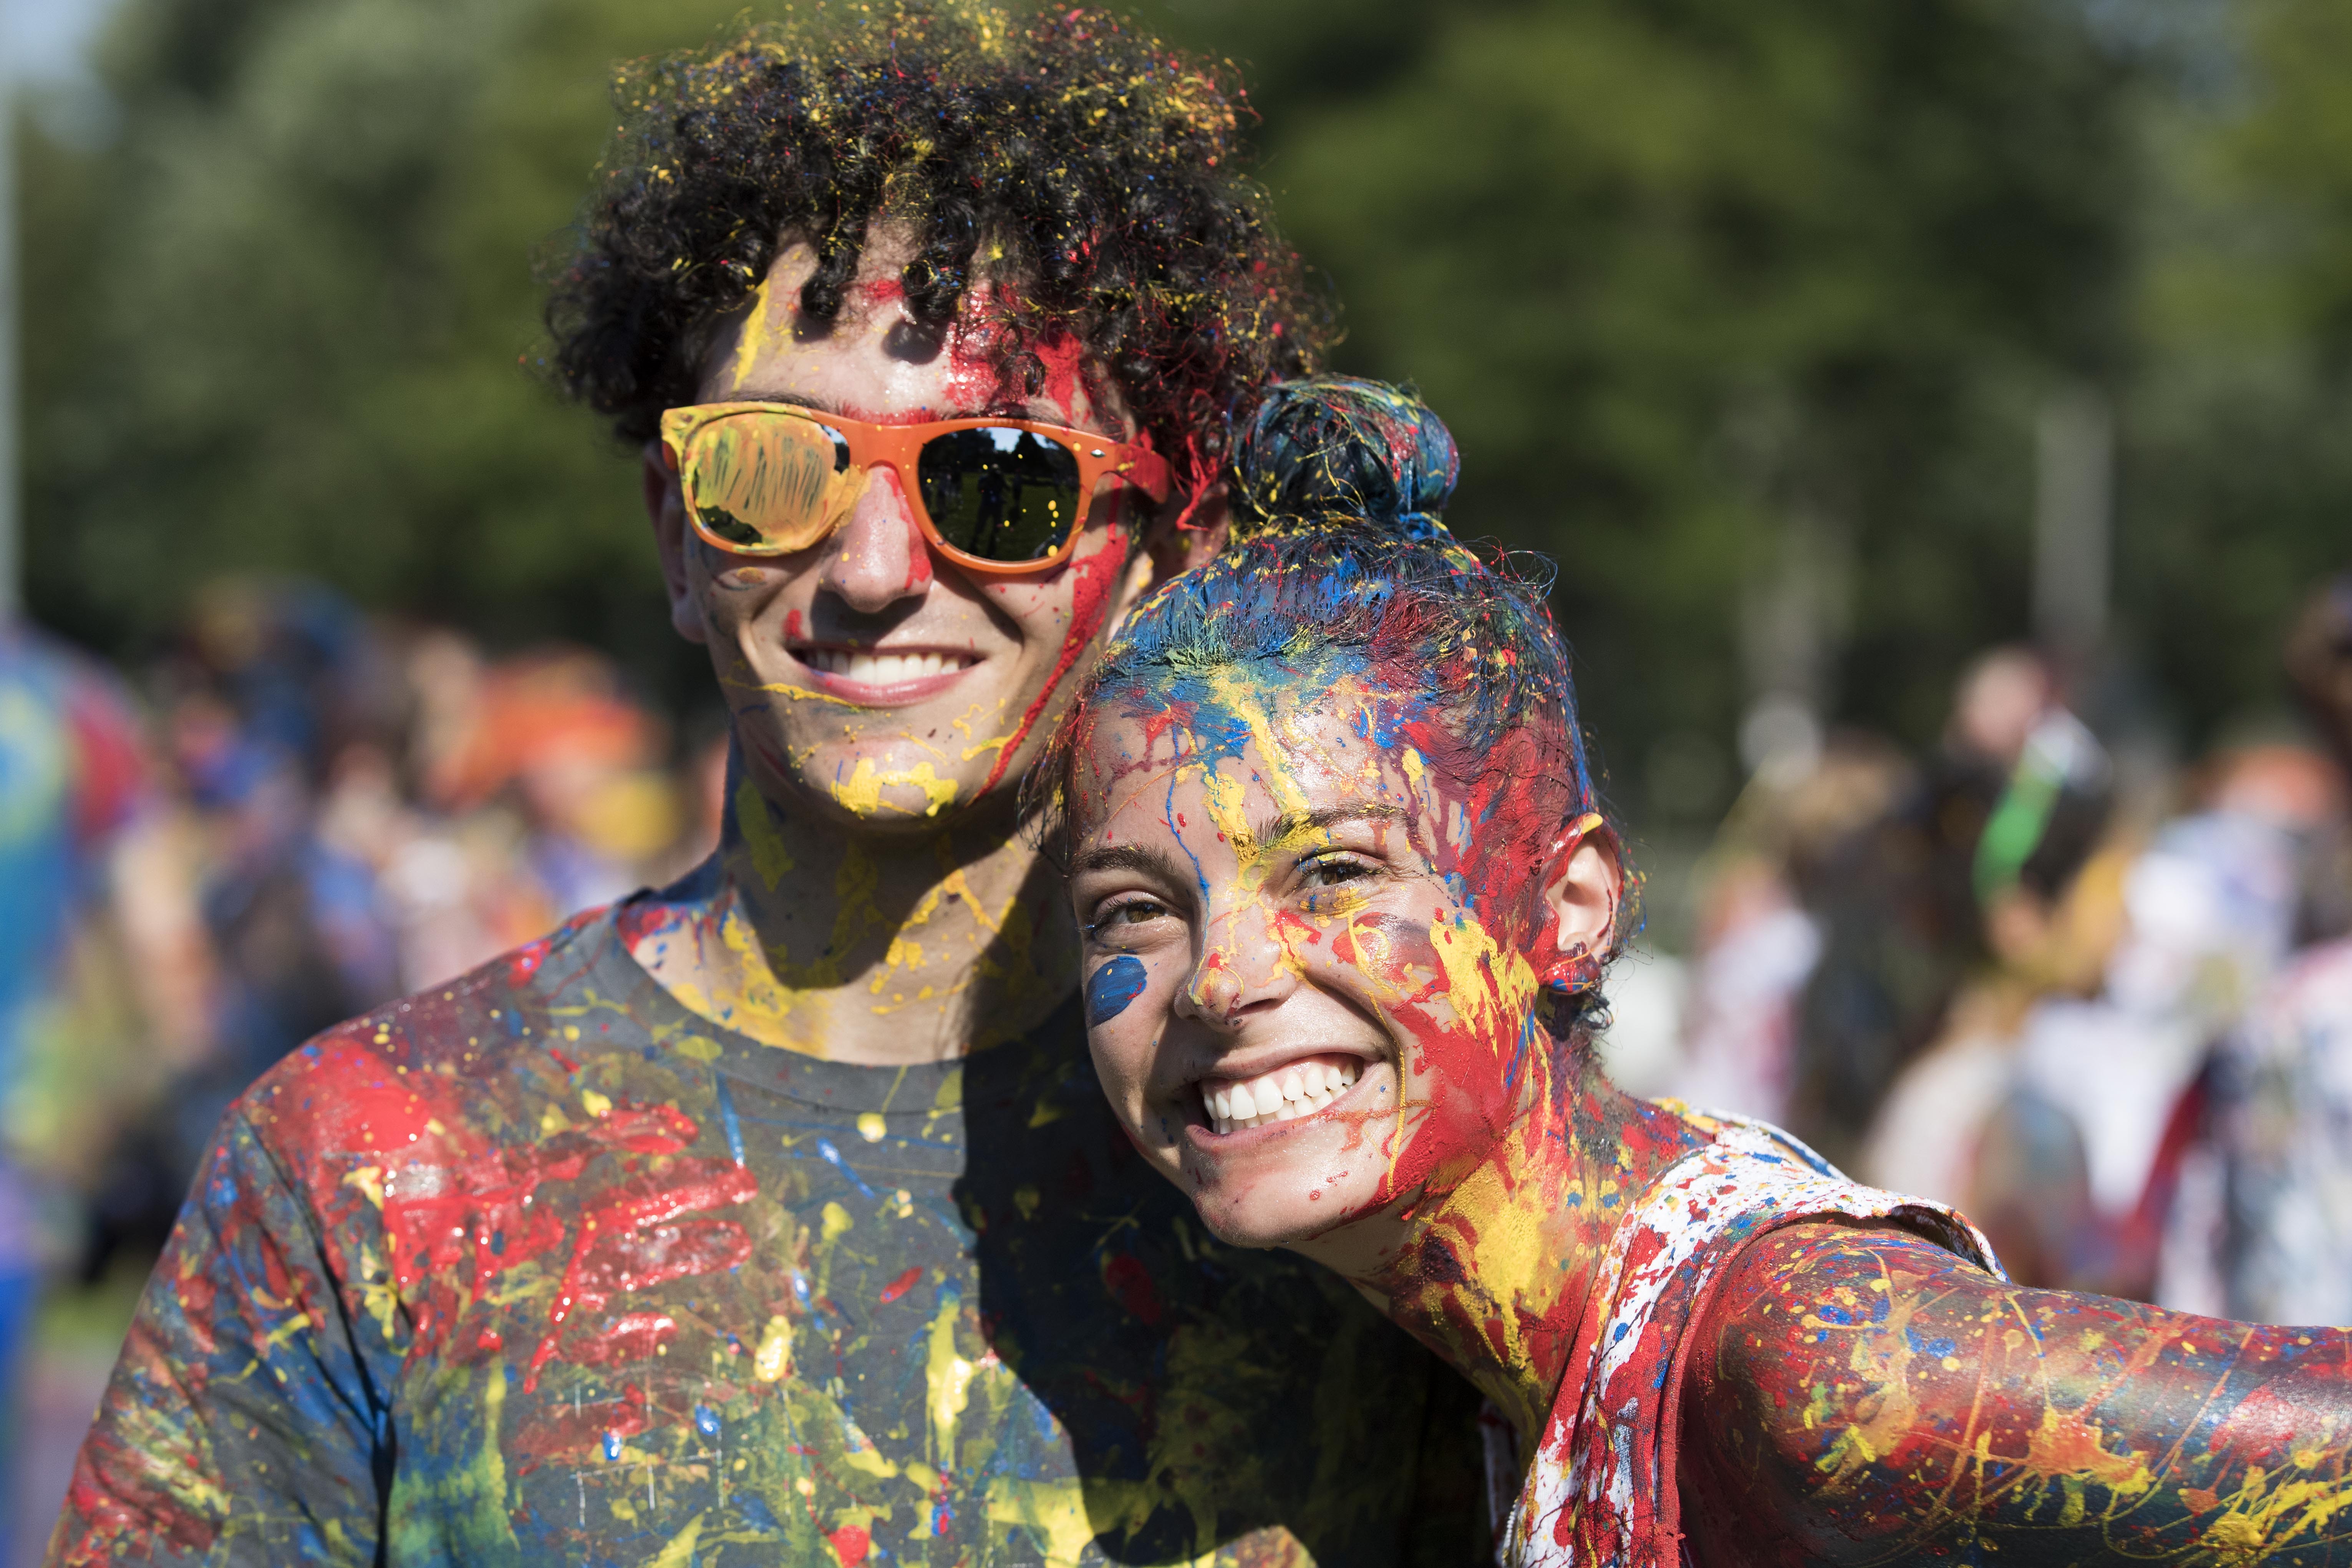 Two Queen's students smiling with tricolour paint on them.